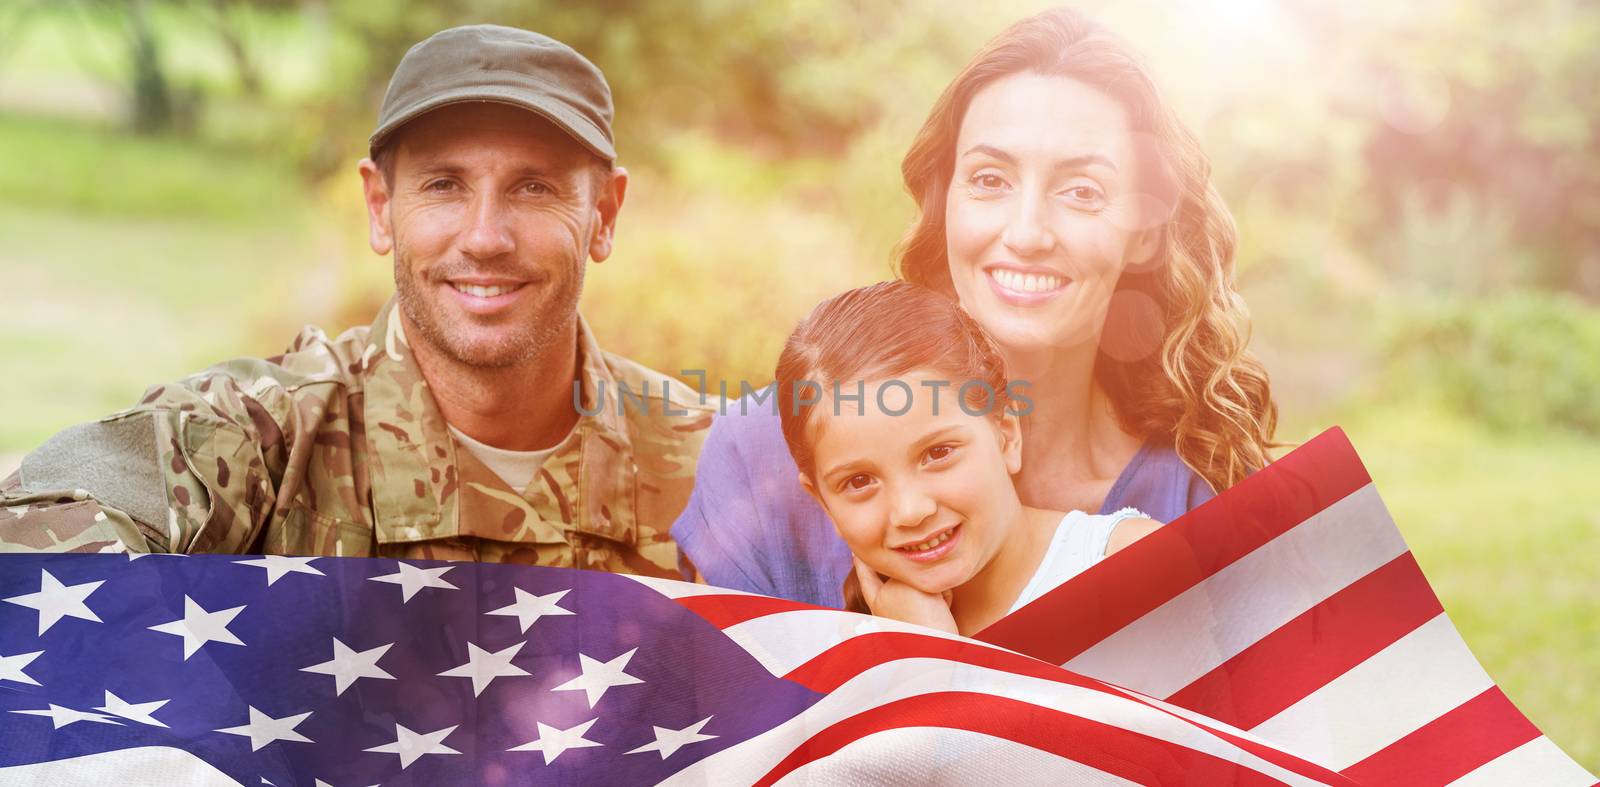 Composite image of portrait of army man with family by Wavebreakmedia